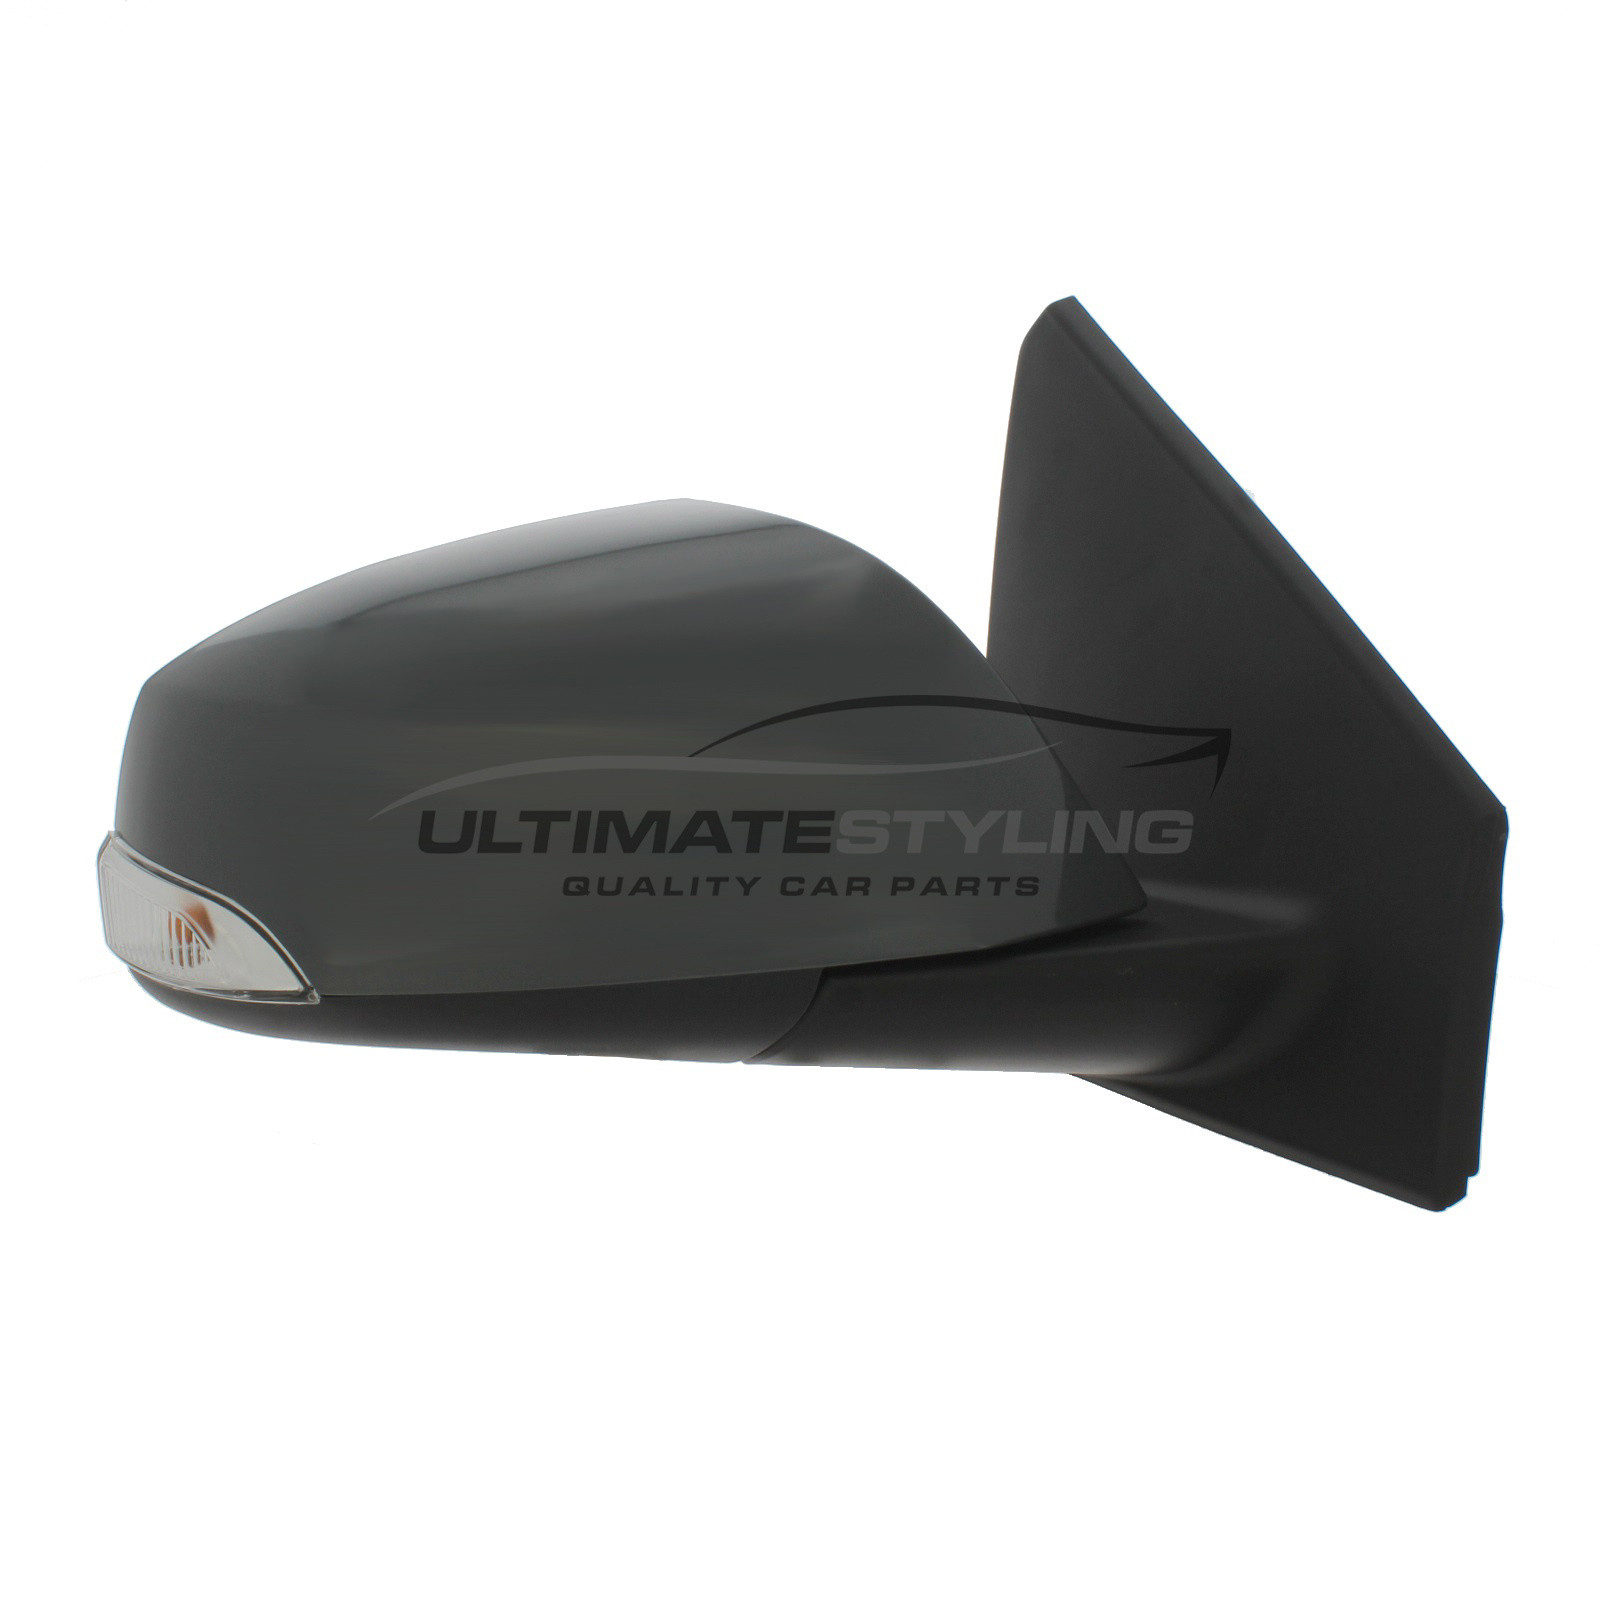 Renault Megane Wing Mirror / Door Mirror - Drivers Side (RH) - Electric adjustment - Heated Glass - Power Folding - Indicator - Primed